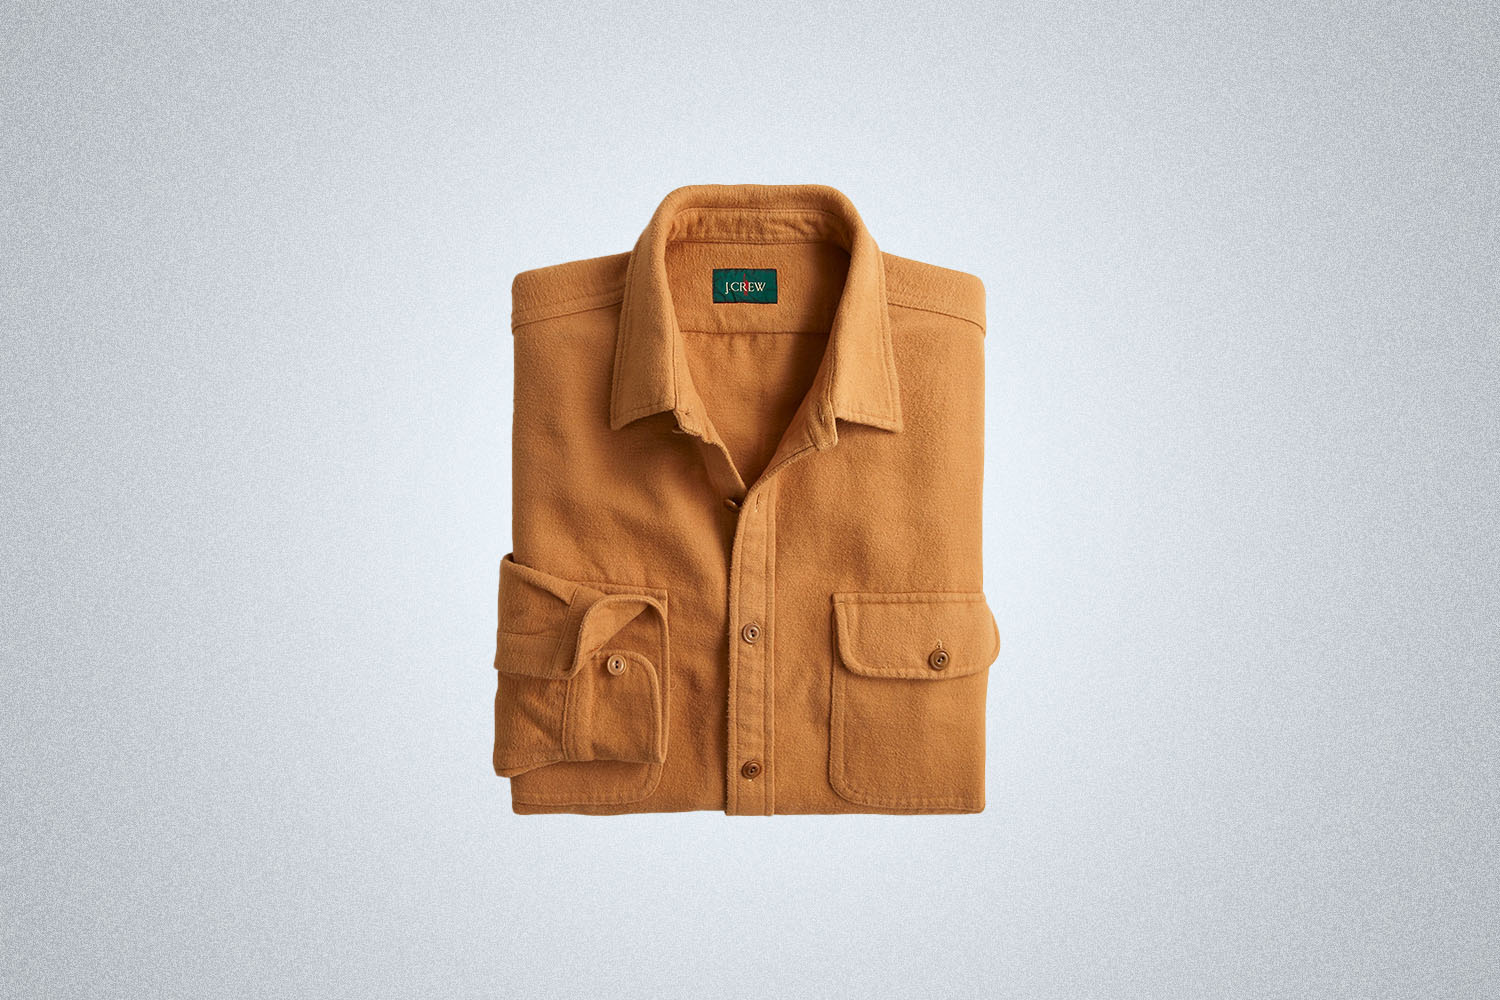 The J.Crew Heavyweight chamois workshirt on a gray background